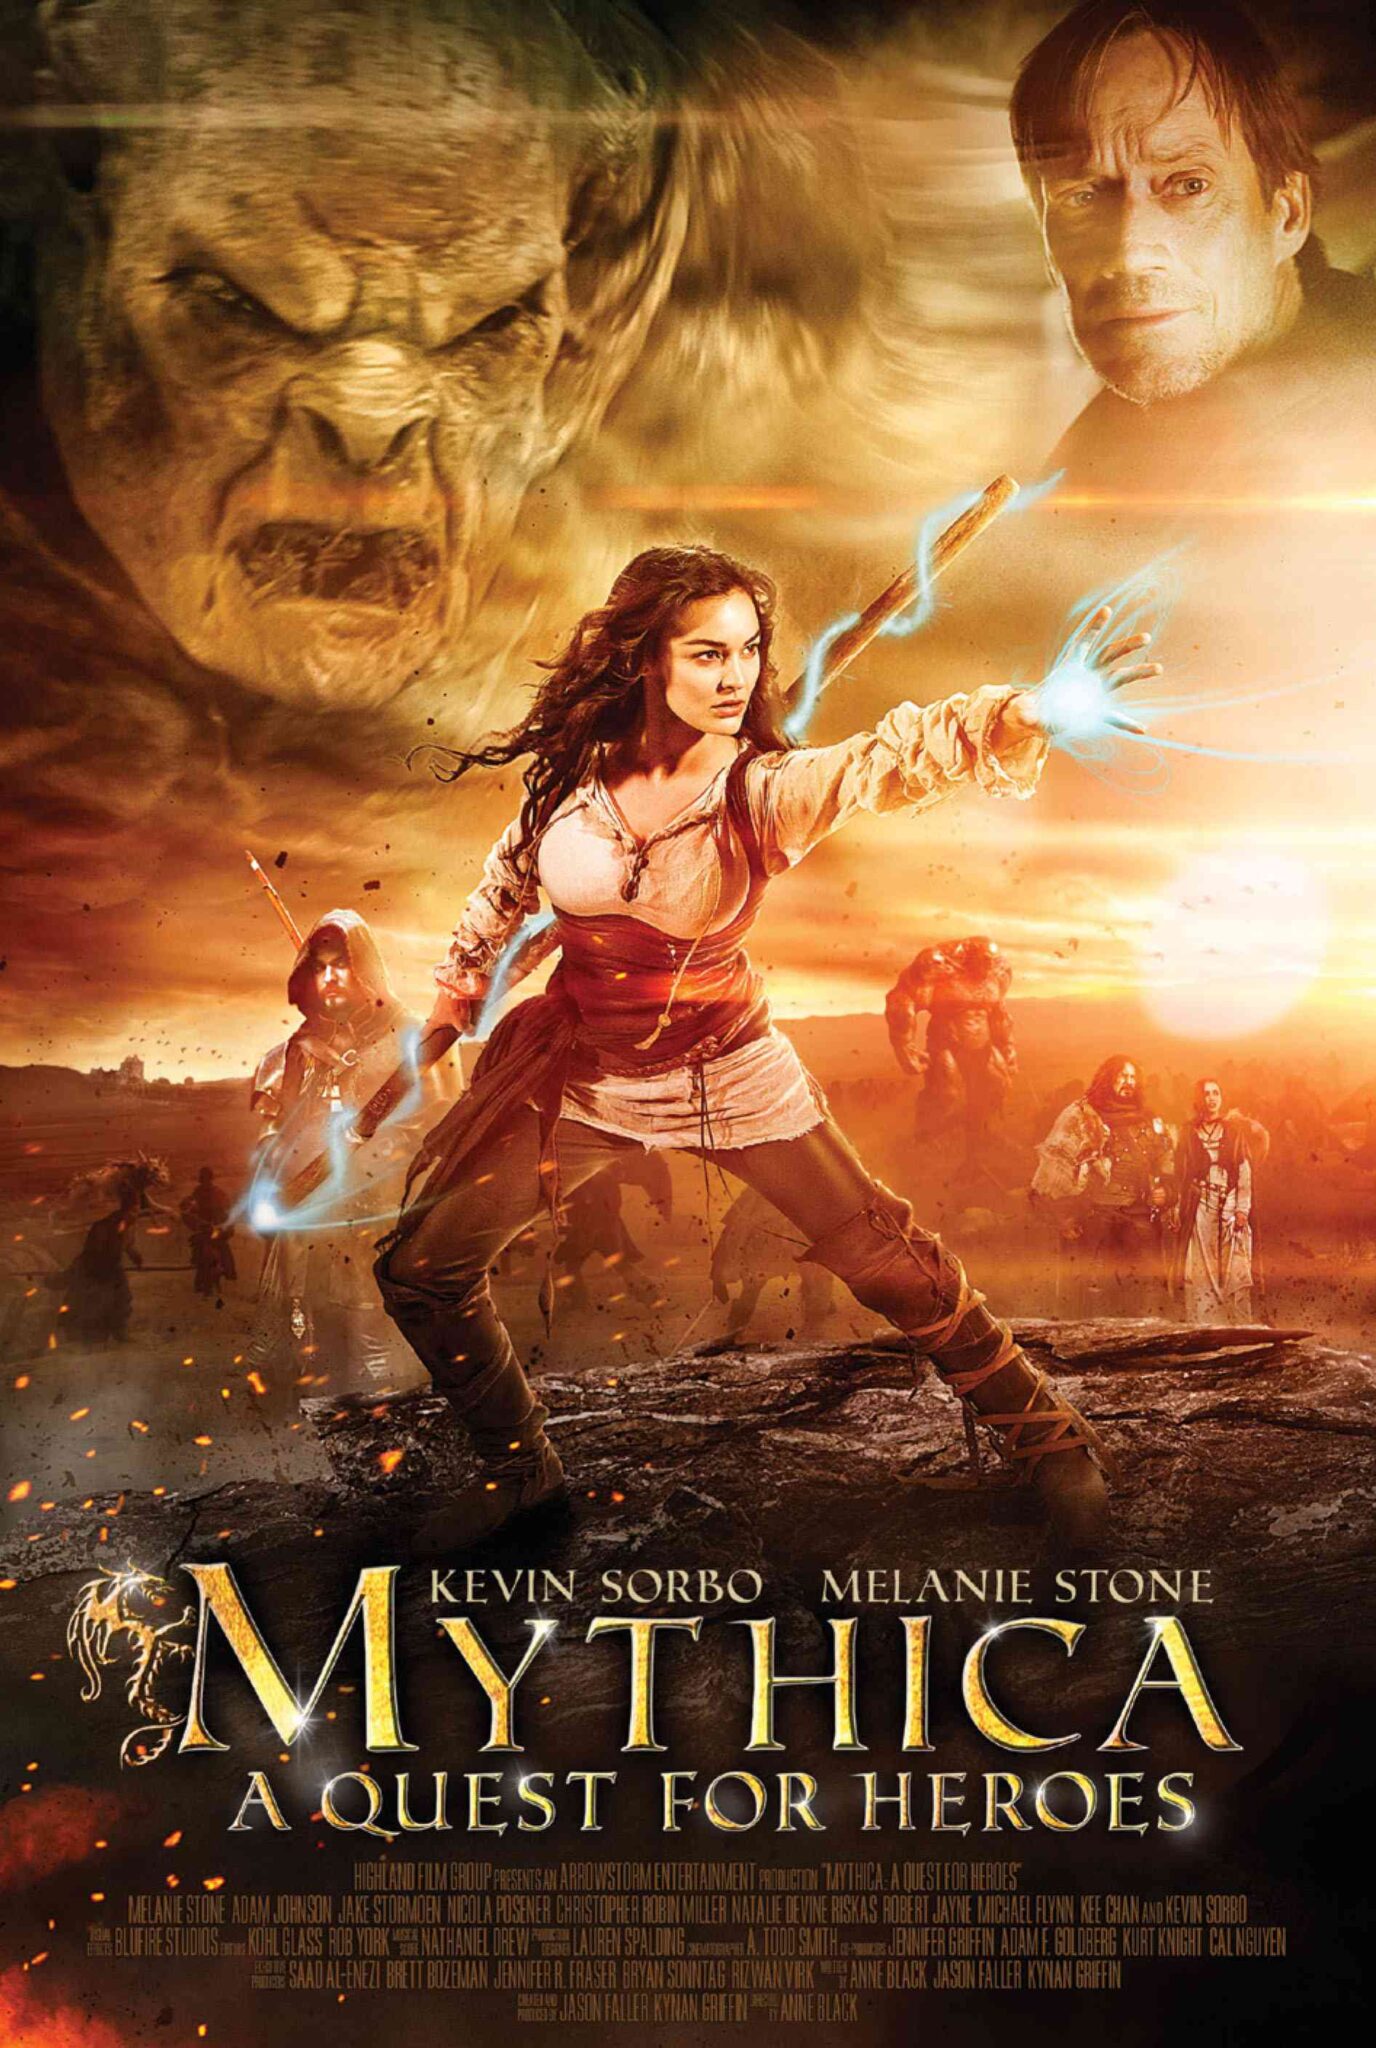 FULL MOVIE: Mythica: A Quest for Heroes (2015)